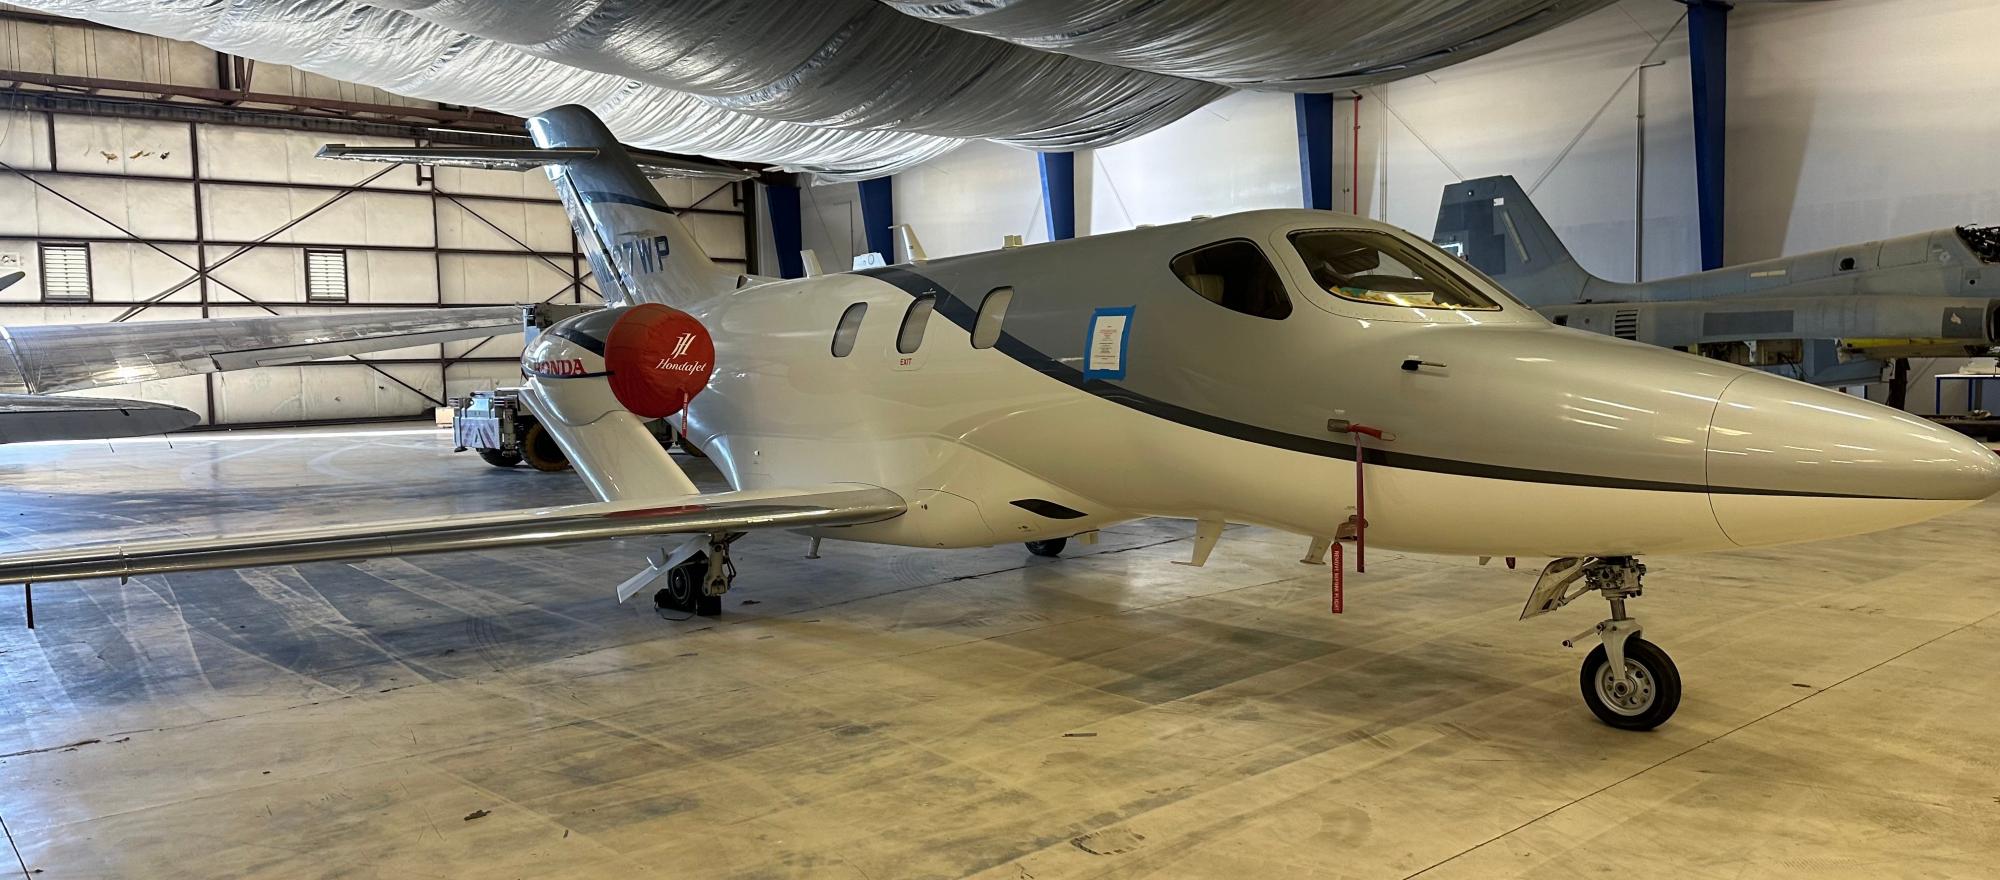 HondaJet With Stormy Past To Hit The Market